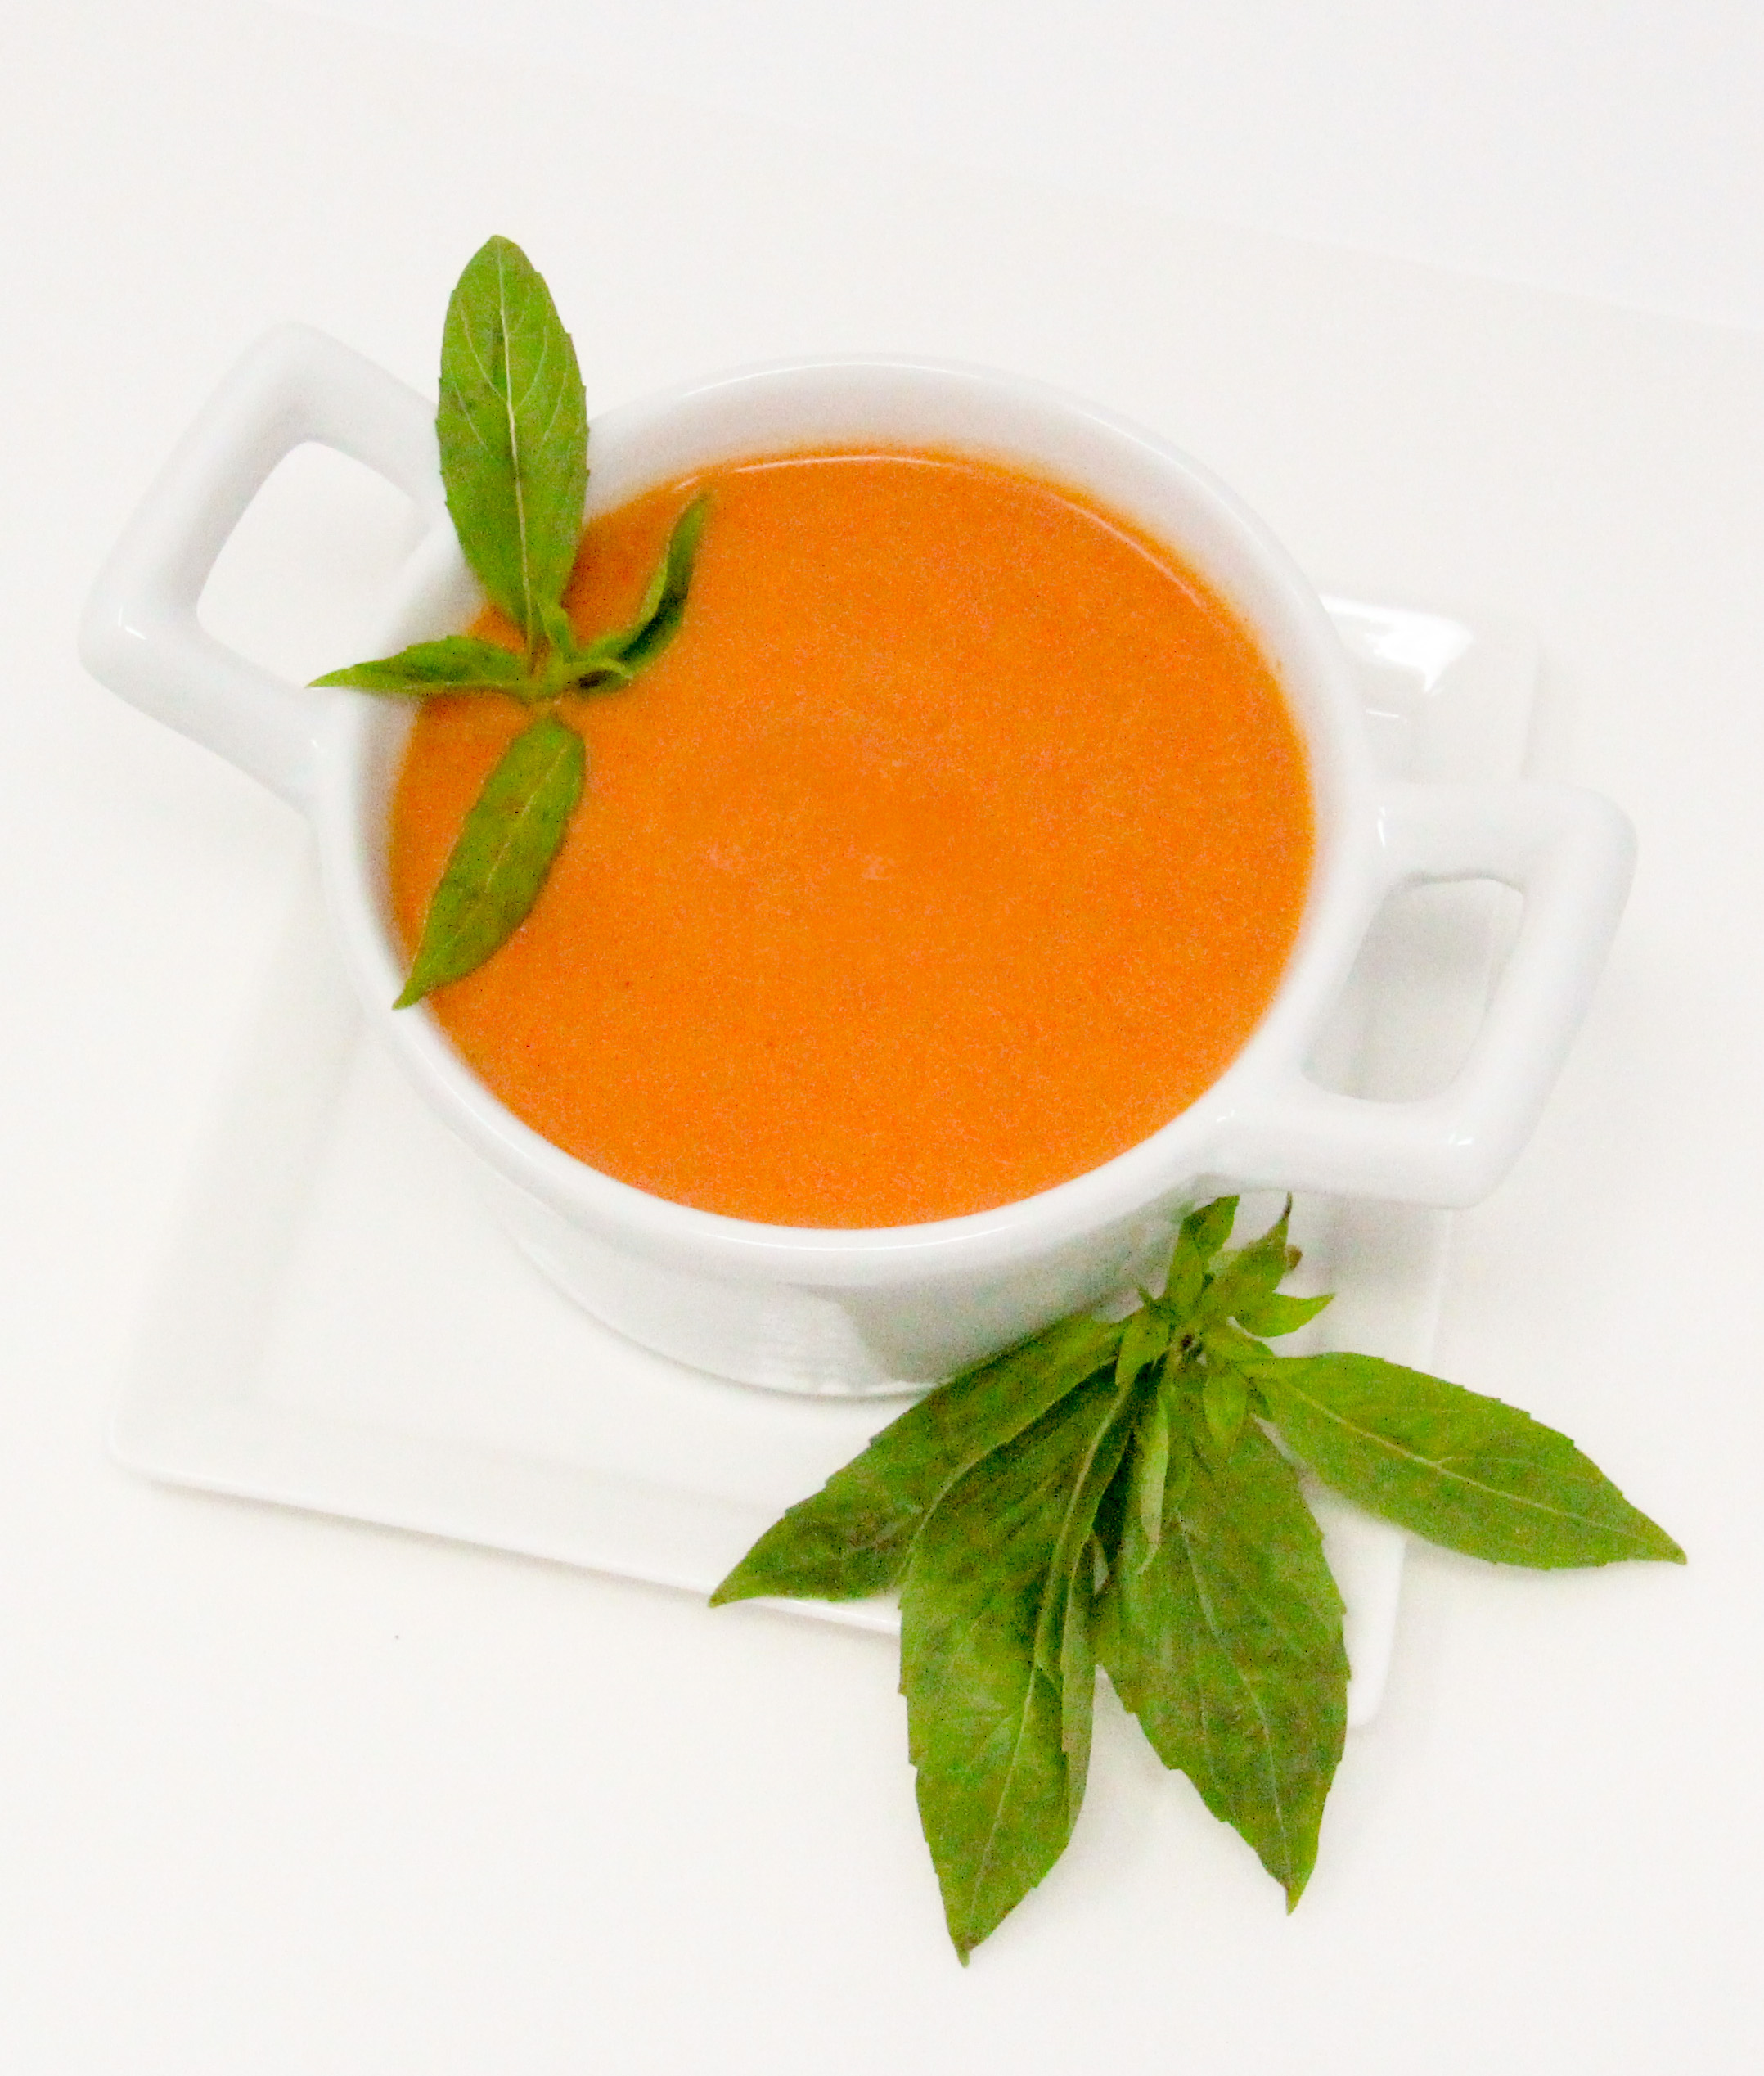 Grant's Tomato Soup uses canned San Marzano tomatoes, plus the addition of other fresh ingredients and sherry which elevates the flavor to yum. With a bit a cream, the added richness complements the tang of cheese in a grilled cheese sandwich. Recipe shared with permission granted by Linda Reilly, author of CHEDDER LATE THAN DEAD. 